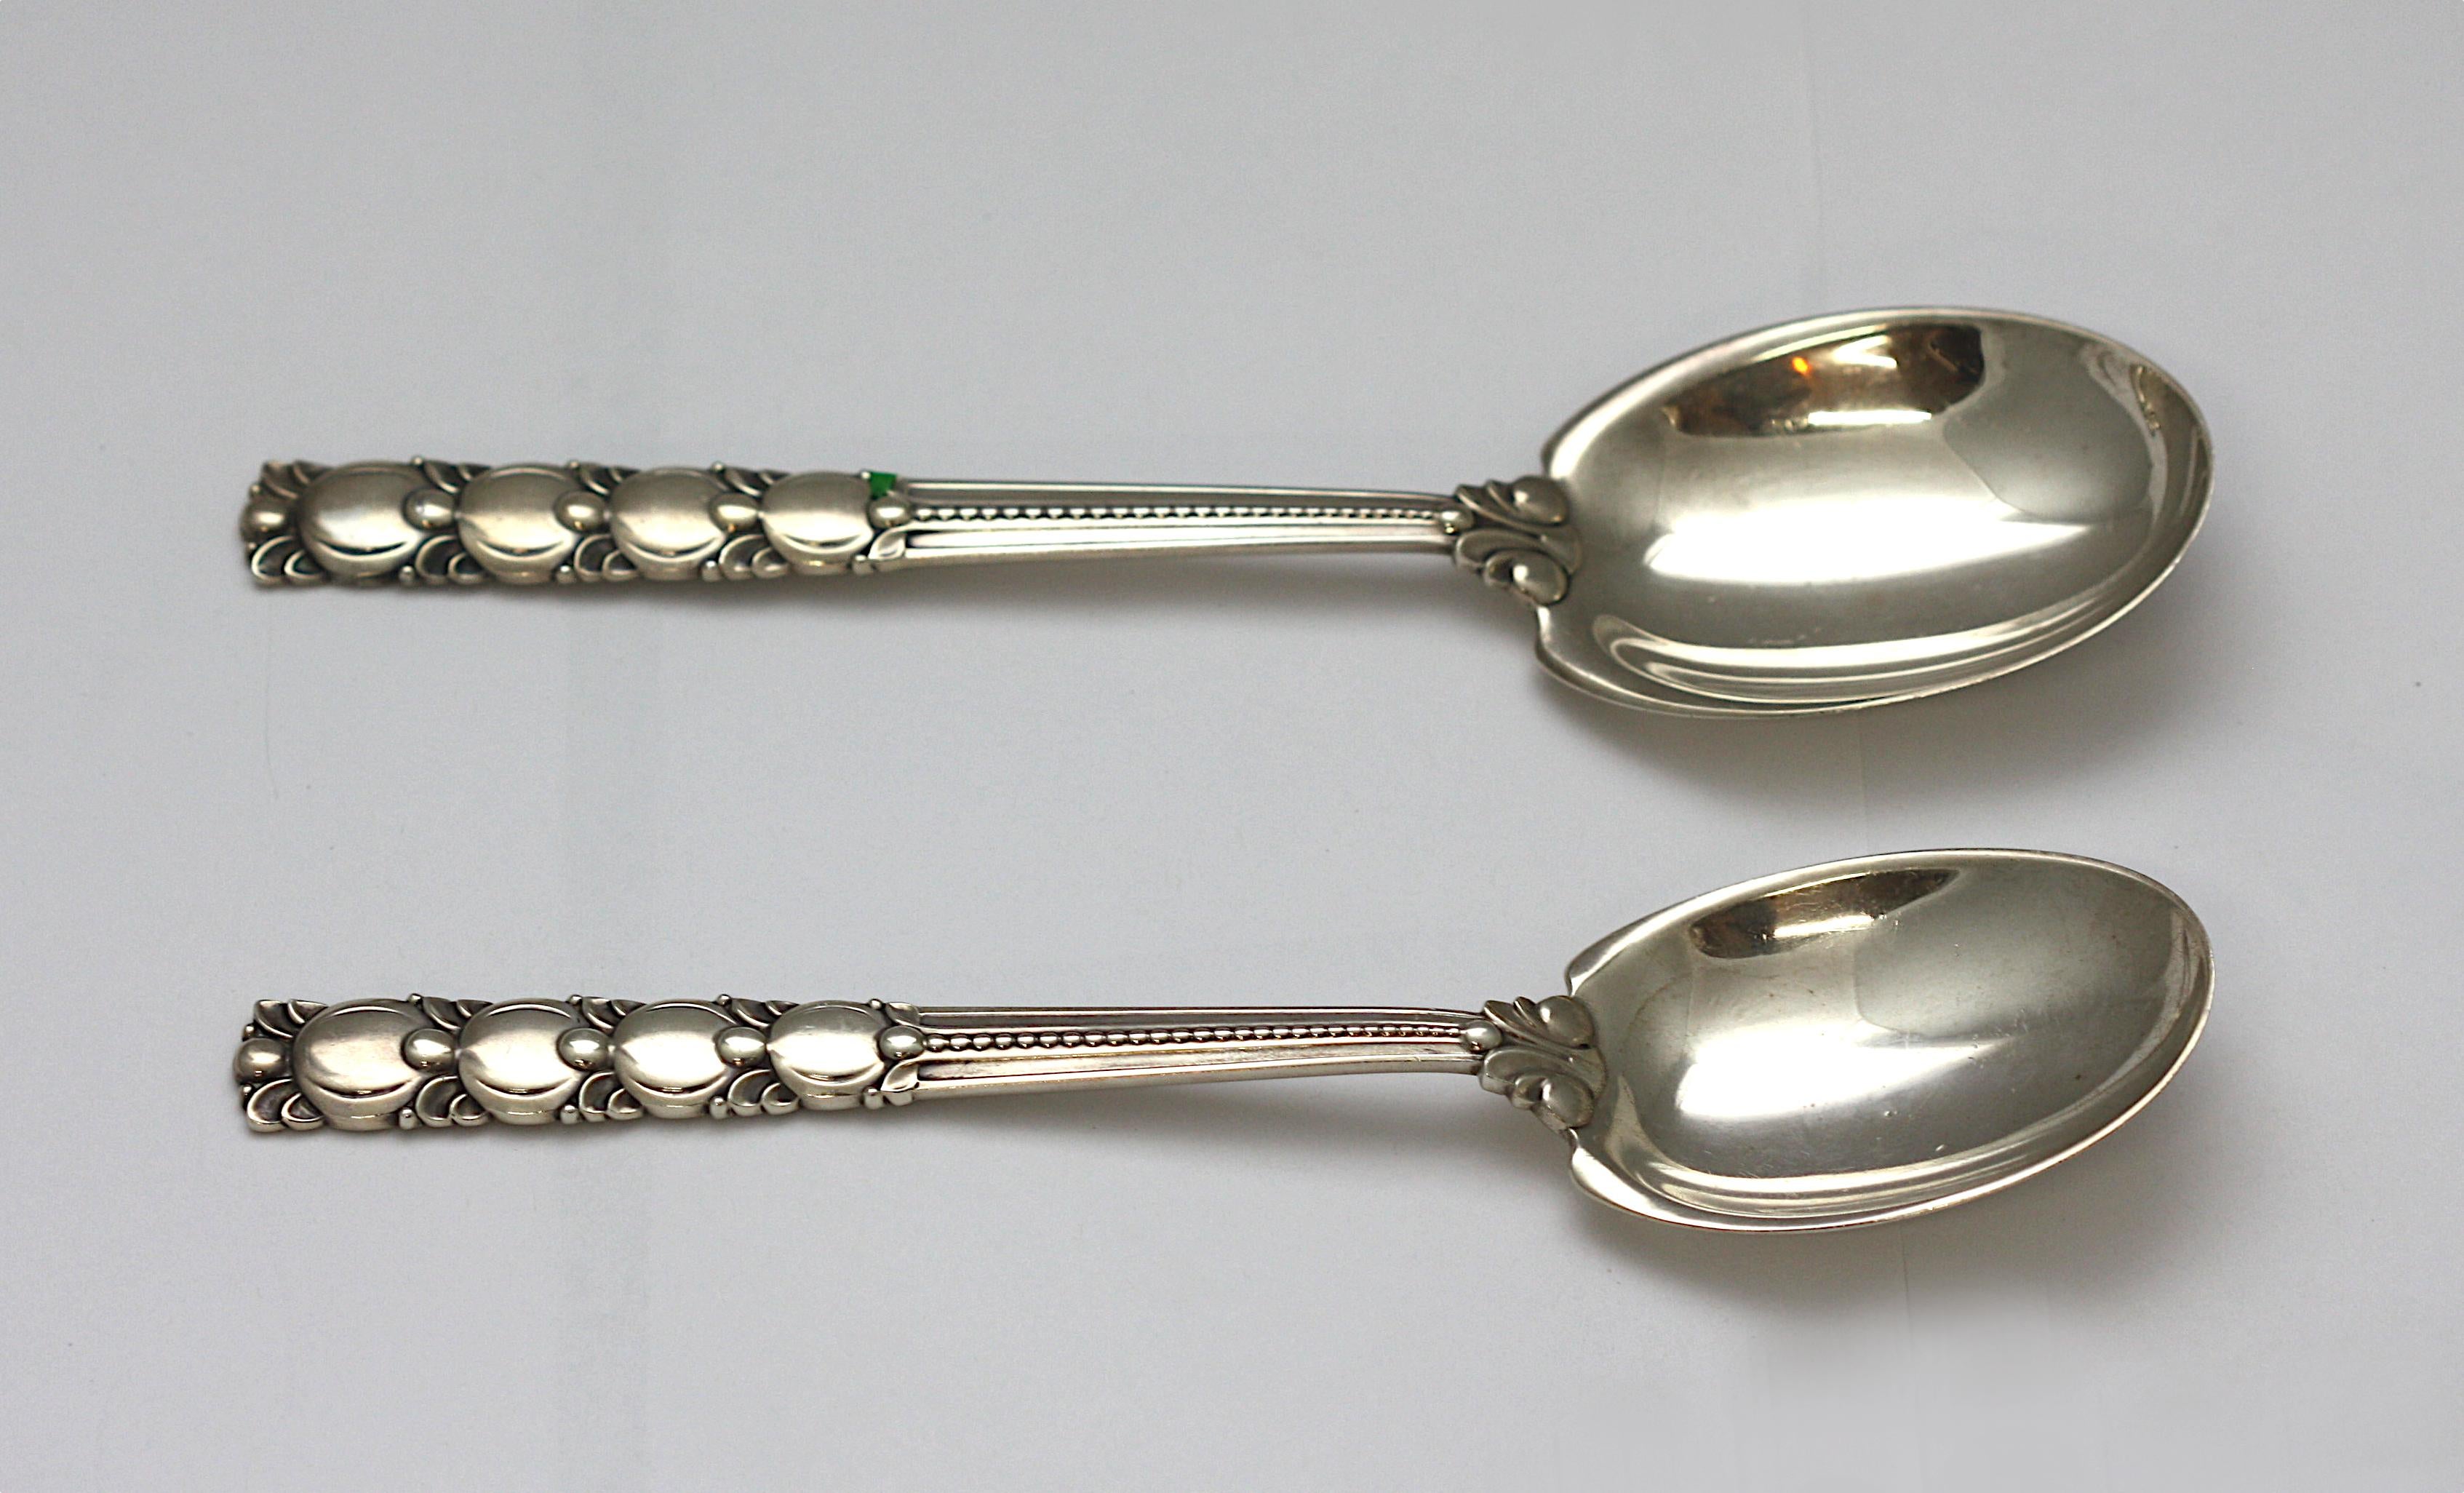 
Pair of Tiffany & C0. Sterling Silver Serving Spoons
Marked, Tiffany & Co, Sterling. In the Tomato / Exhibition pattern. The handle cast with graduating stylized circular and bead motifs. Length 10 in (25.4 cm.), 8.75 ozt.